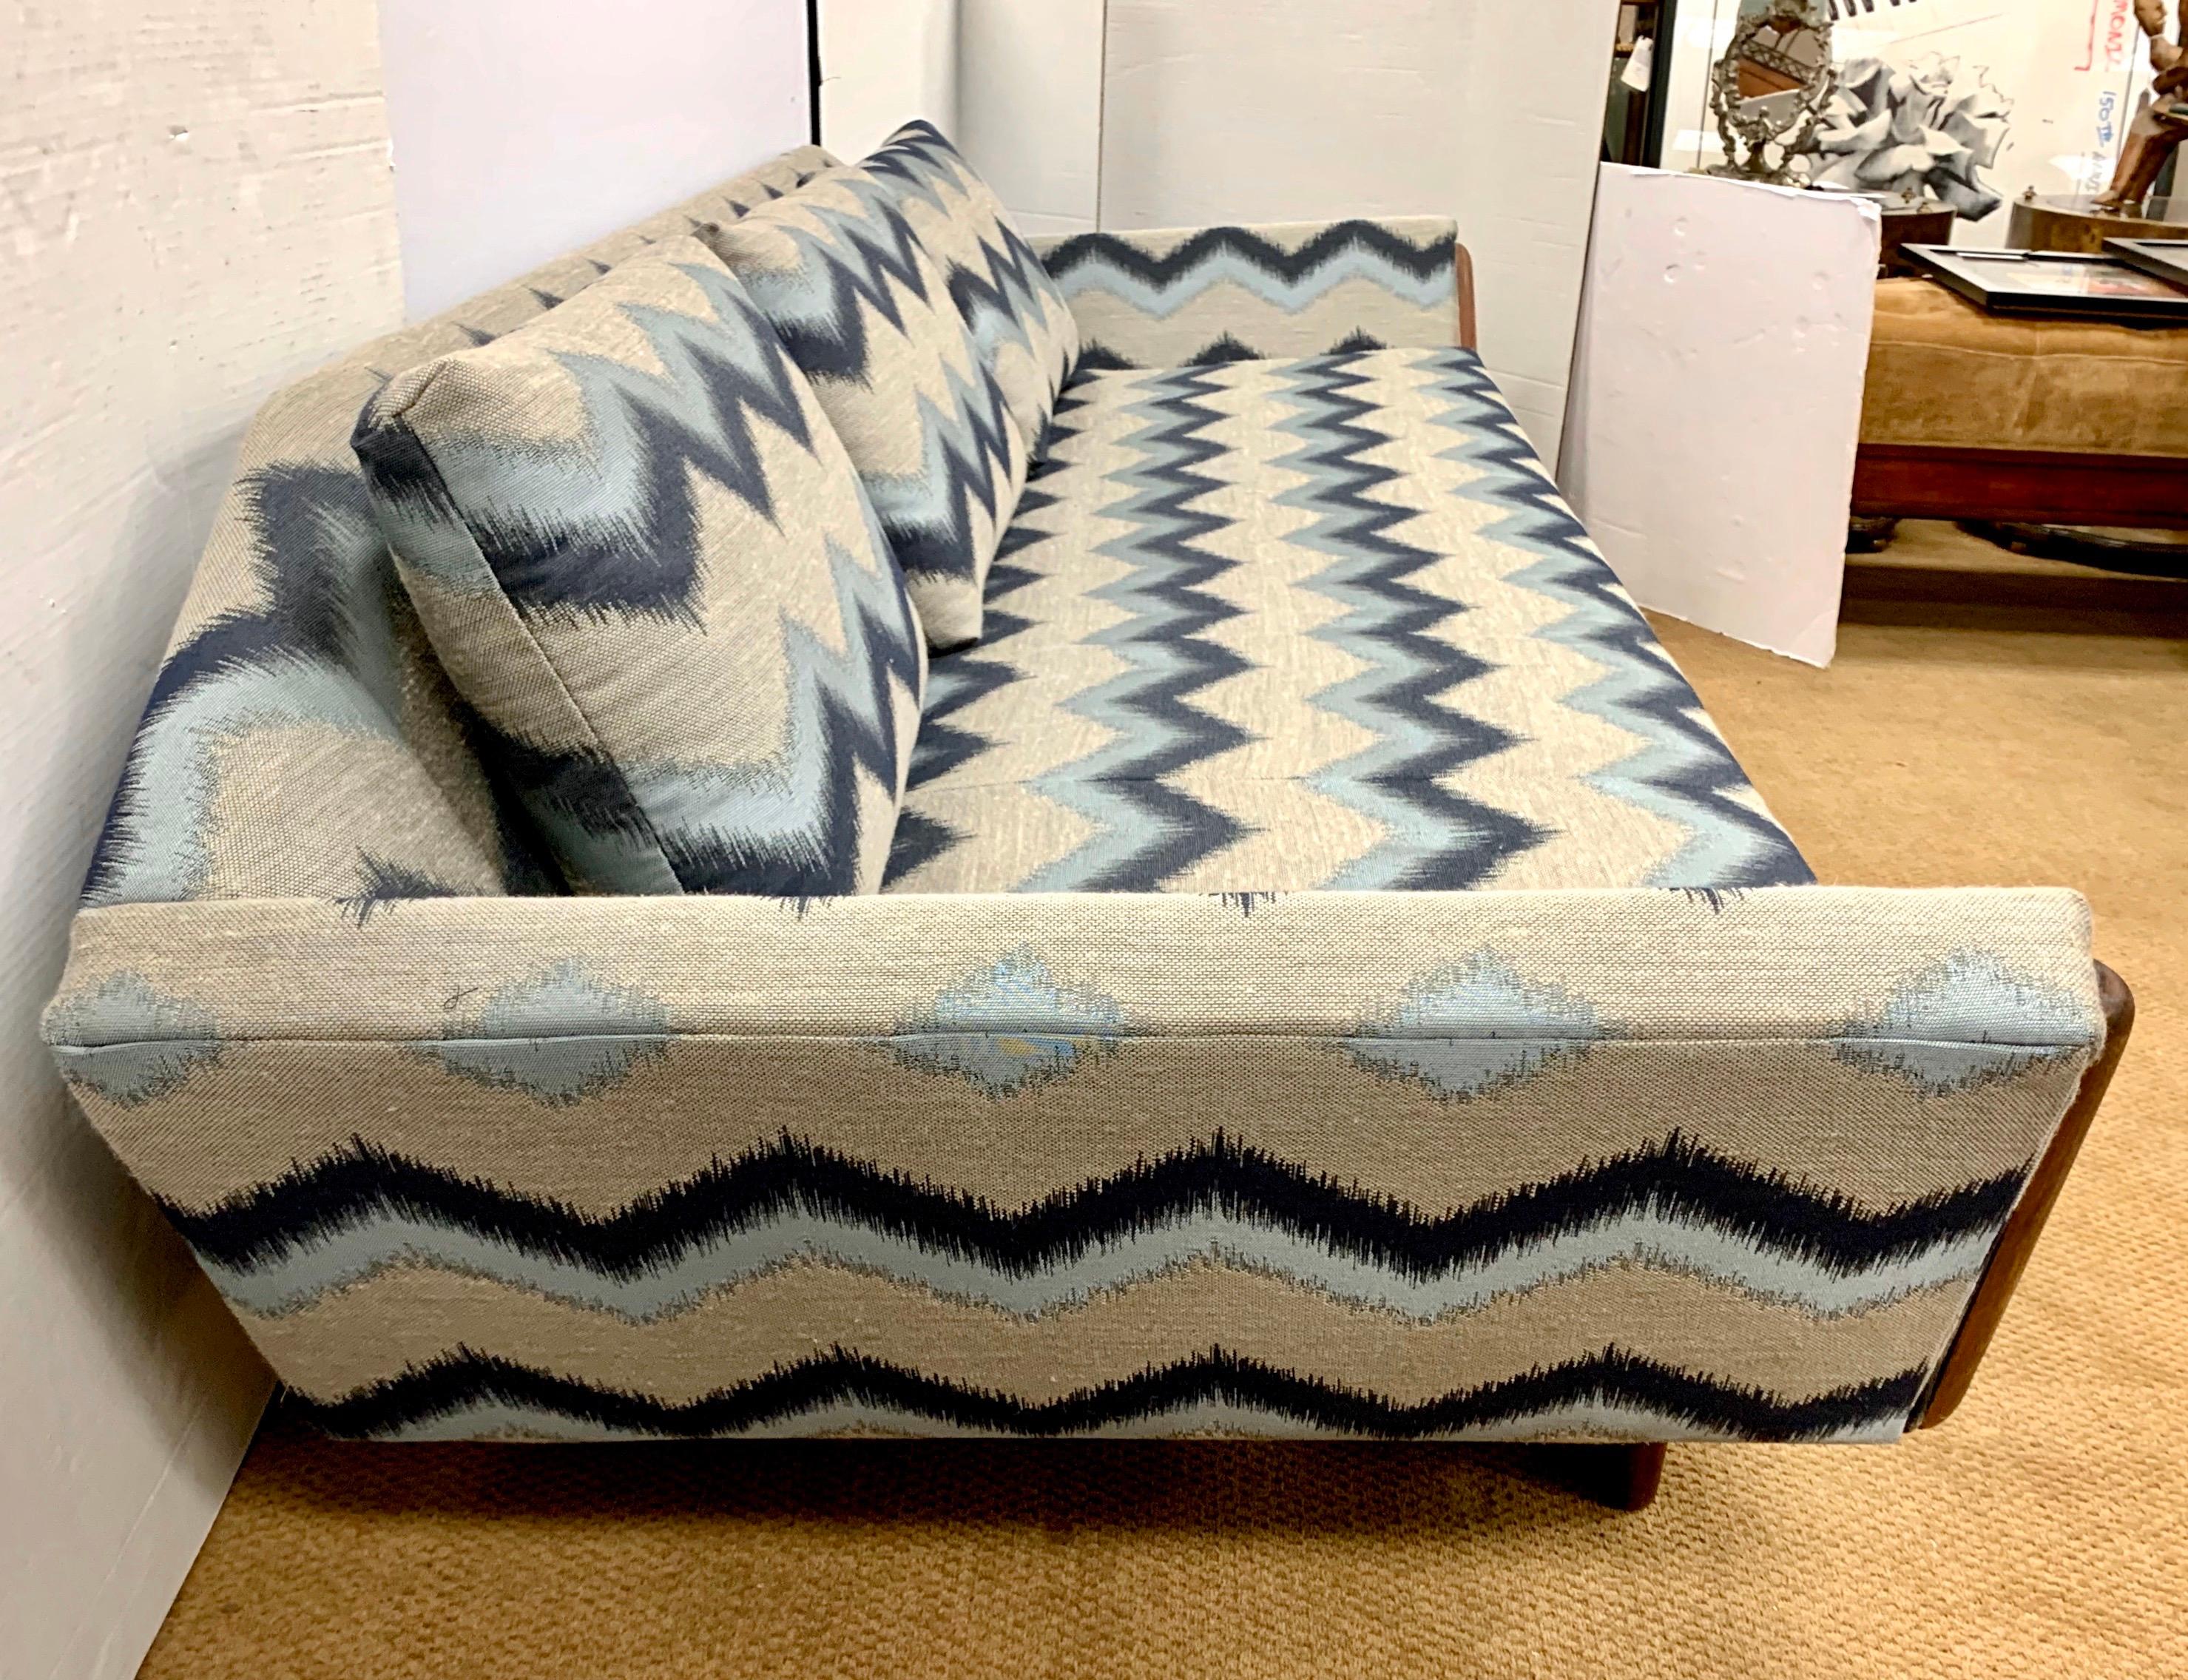 refurbished couch